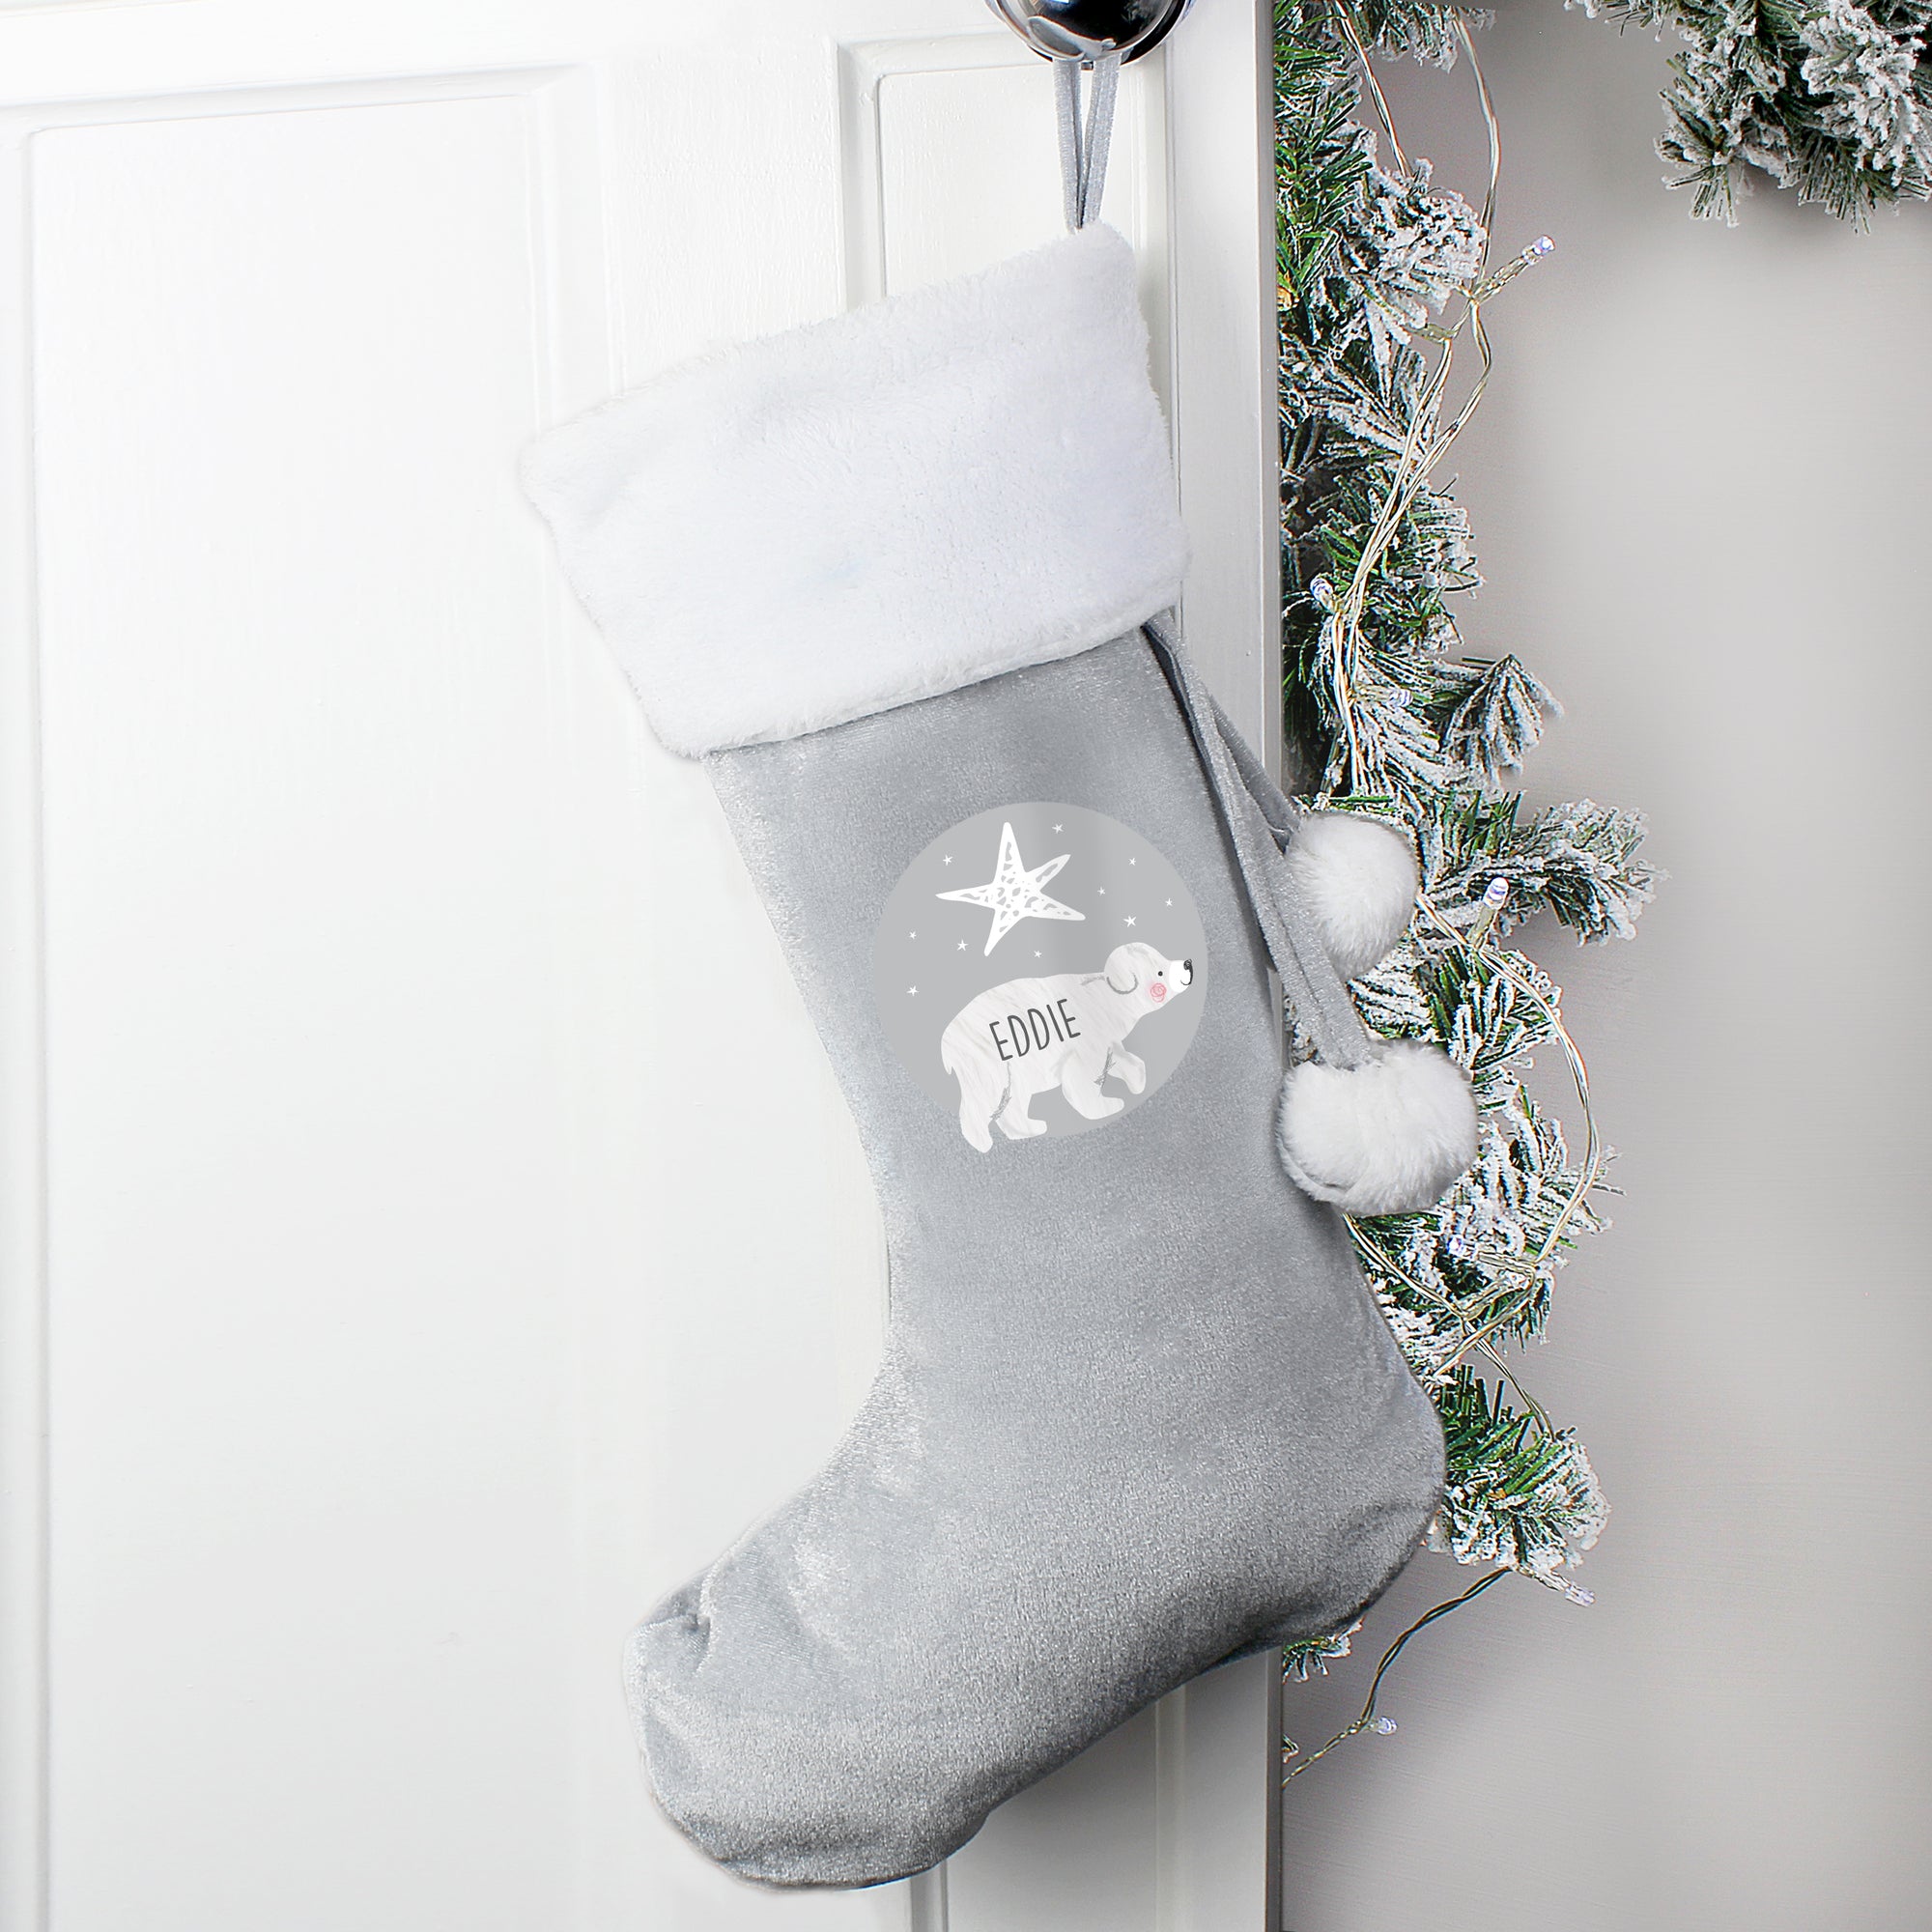 Personalised grey velvet Christmas stocking with a plush white trim. The front of the stocking features an illustration of a hand-drawn baby polar bear with a star above it and the stocking can be personalised with a name of your choice which will be printed in a black modern uppercase font inside the image of the bear.